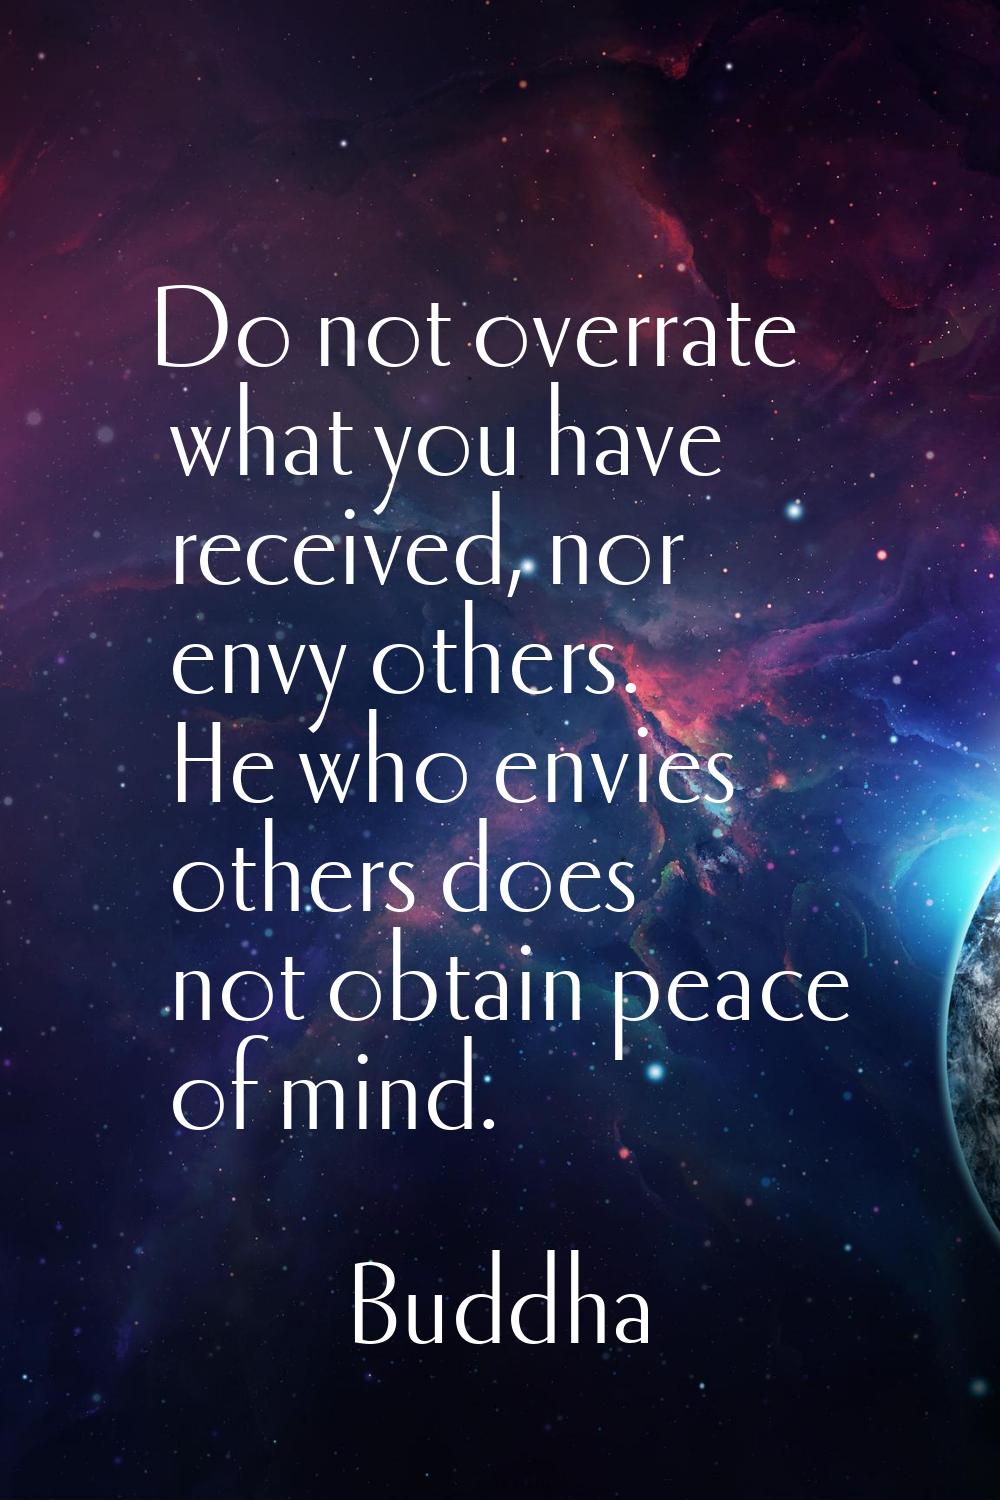 Do not overrate what you have received, nor envy others. He who envies others does not obtain peace